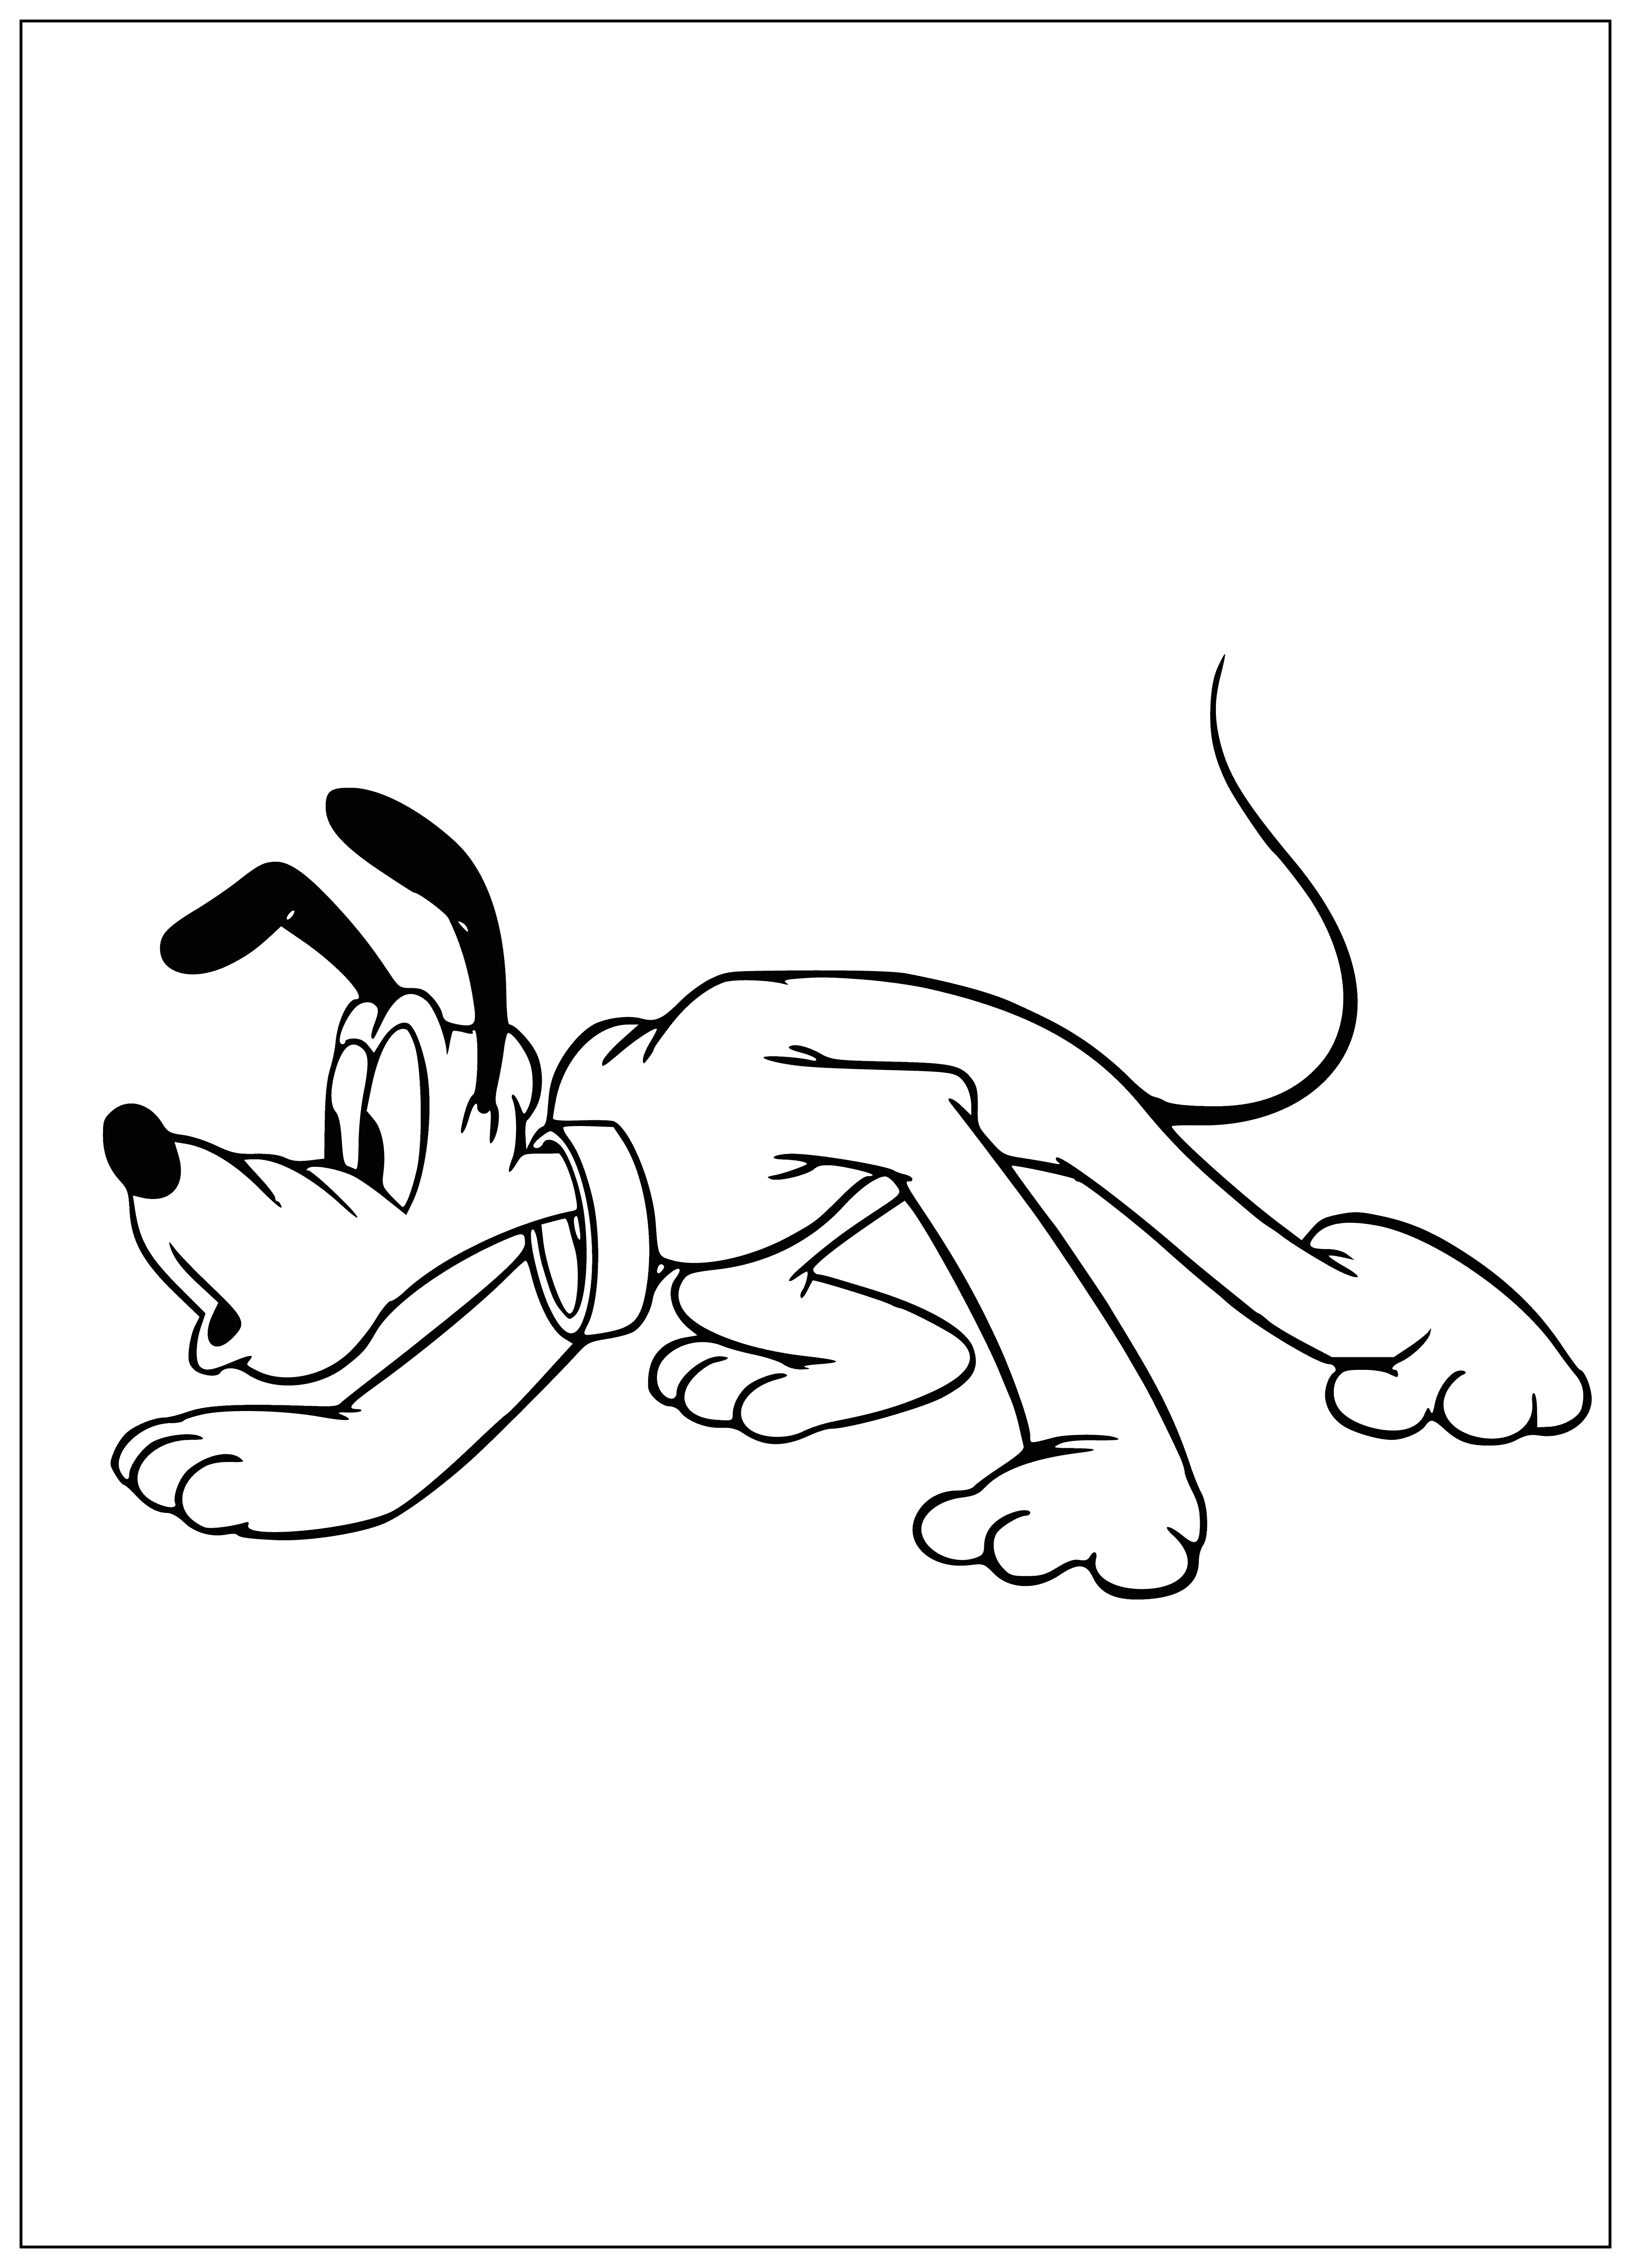 coloring page: Mickey and Pluto stand together, Mickey wearing gloves, red pants and a yellow shirt, Pluto a yellow dog with black spots wearing a red collar.